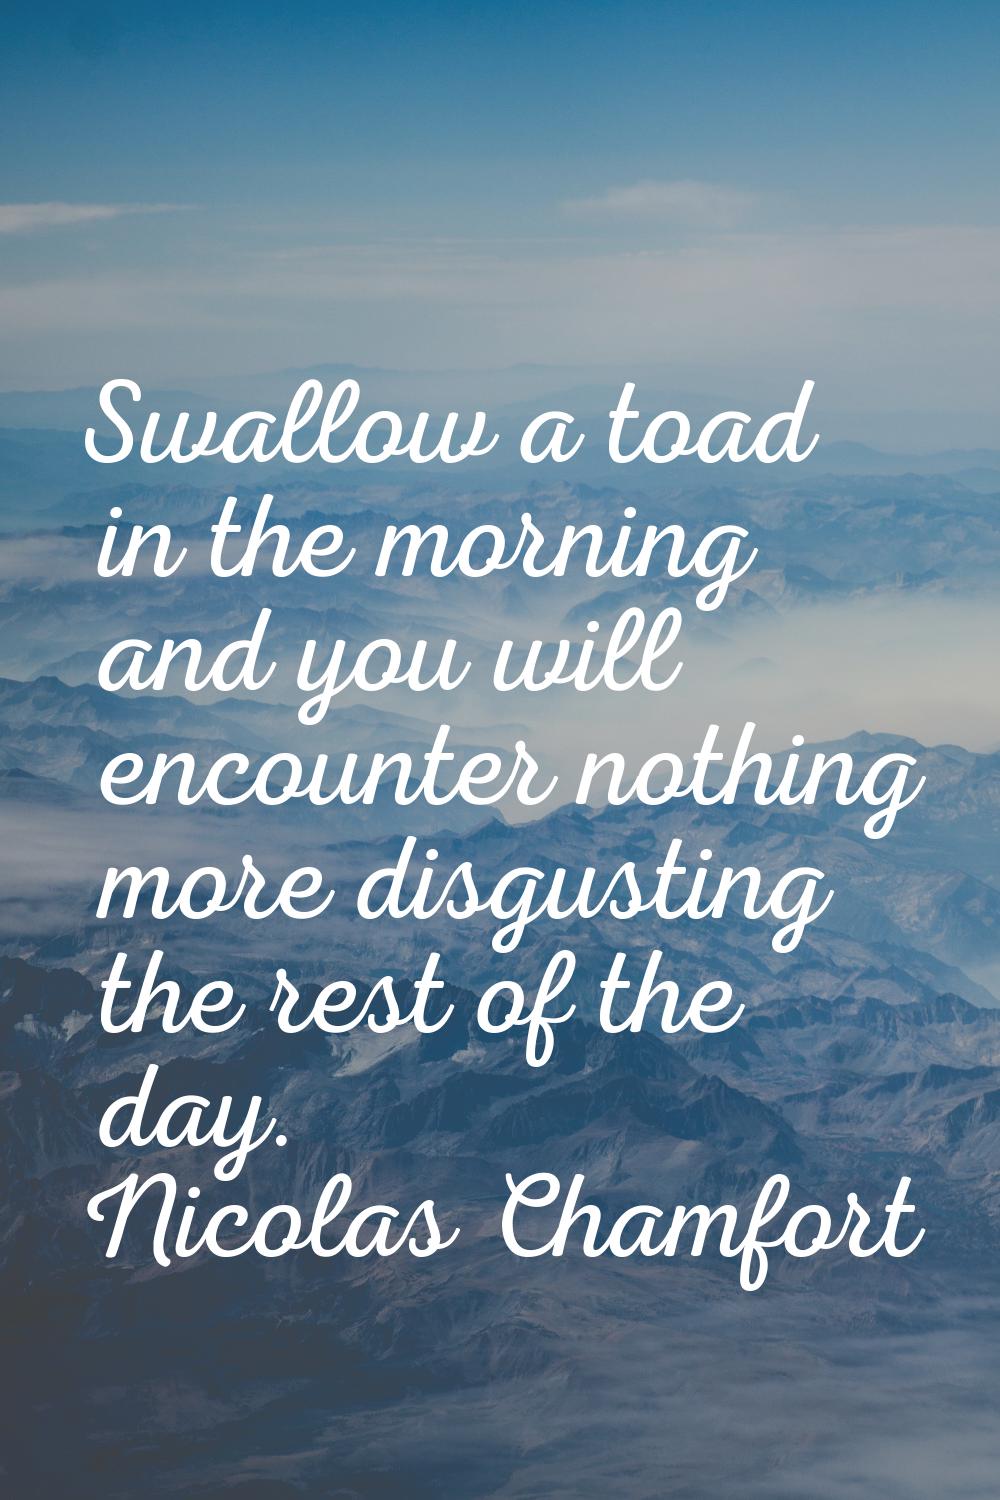 Swallow a toad in the morning and you will encounter nothing more disgusting the rest of the day.